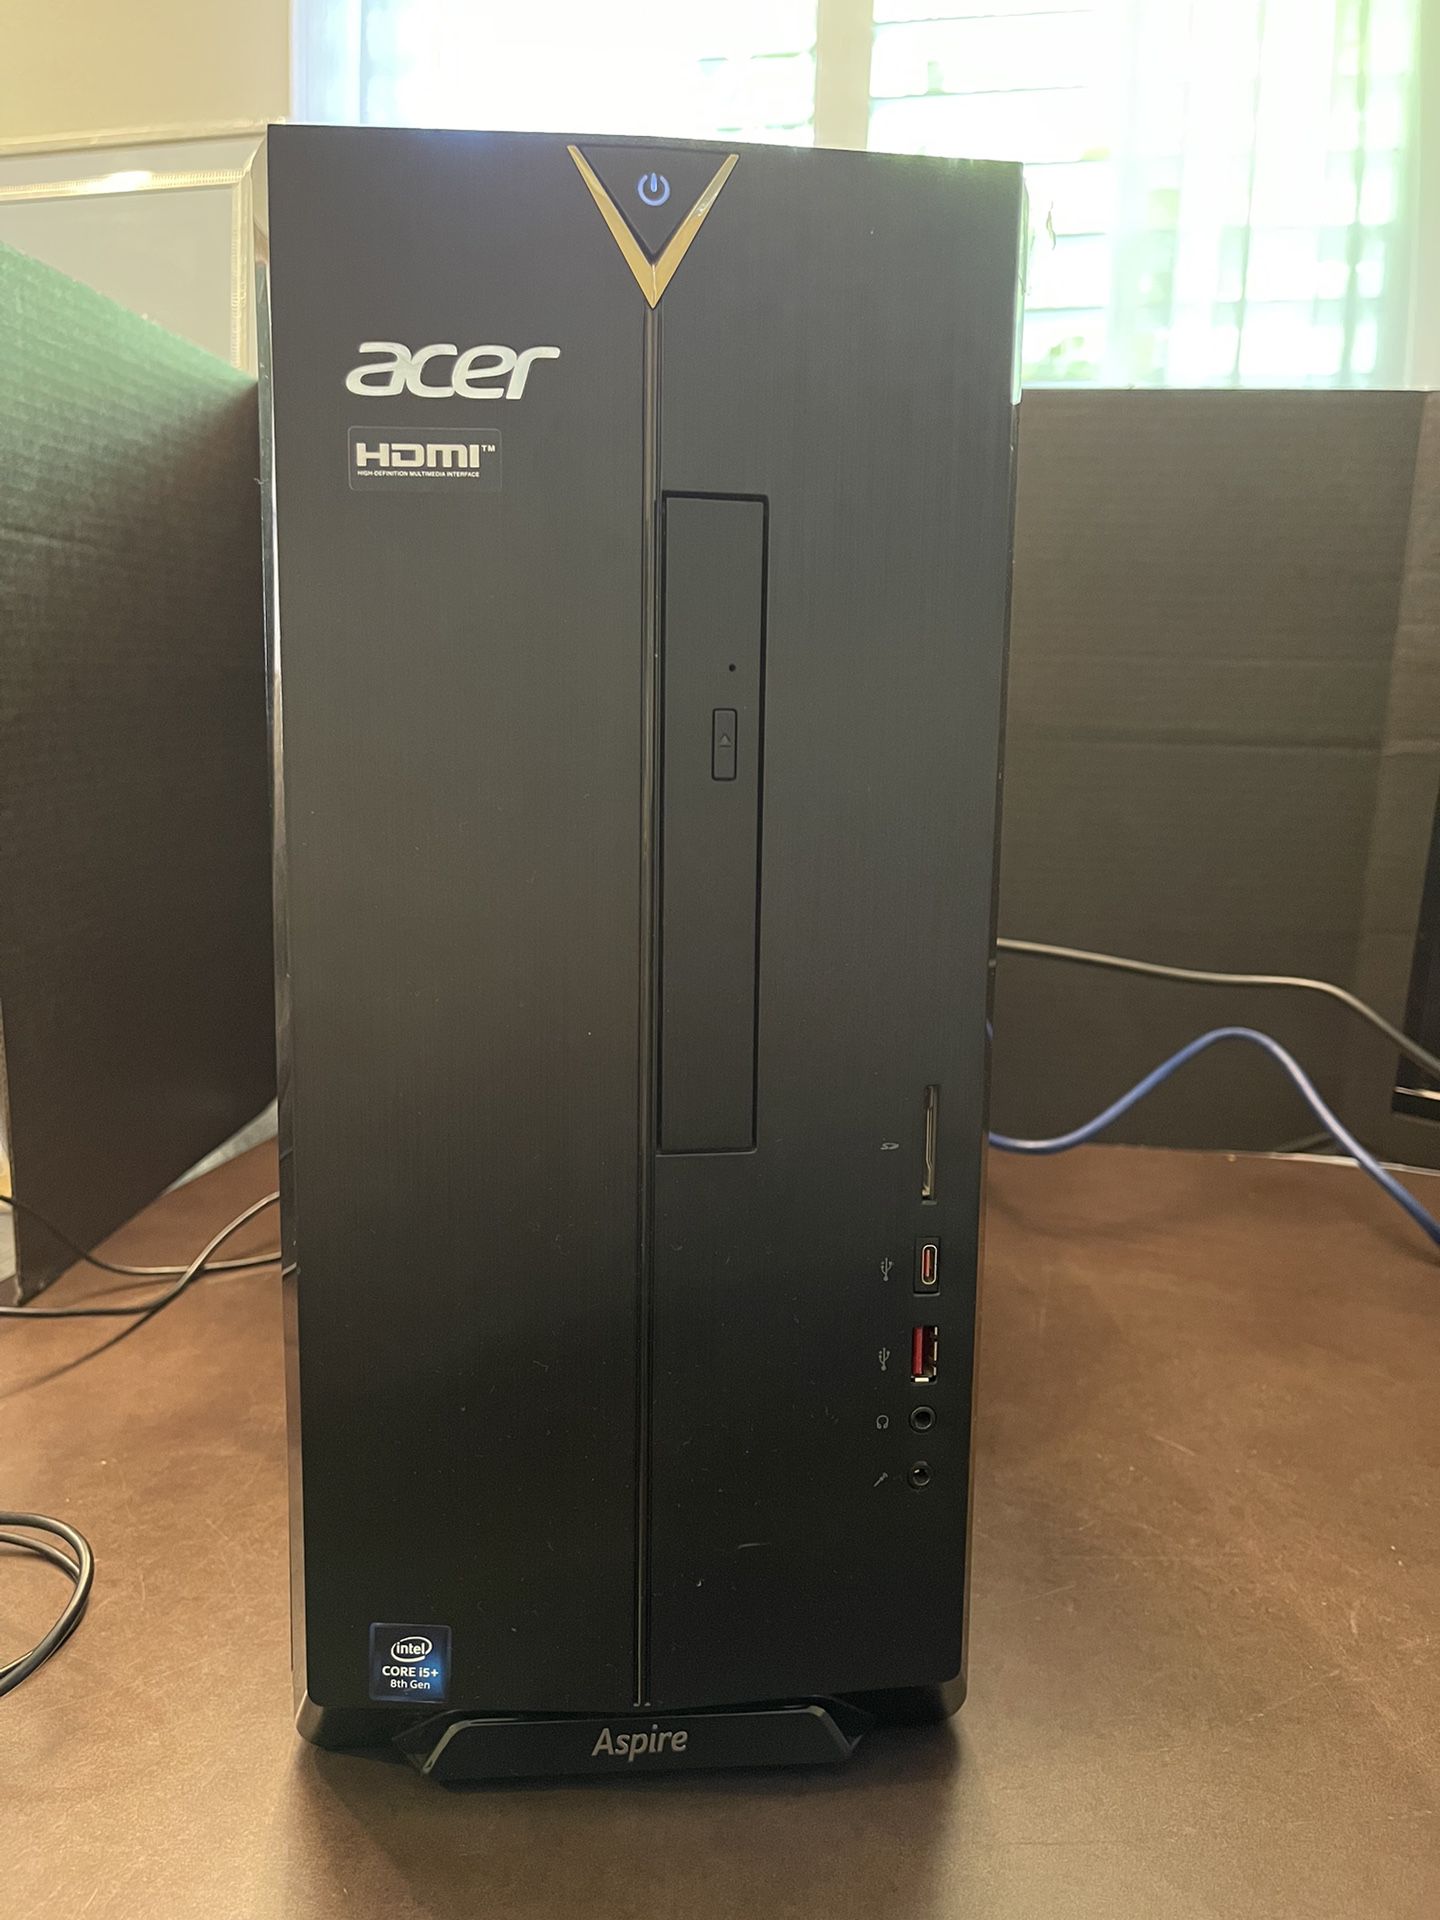 Acer Aspire Gaming Workstation Computer PC